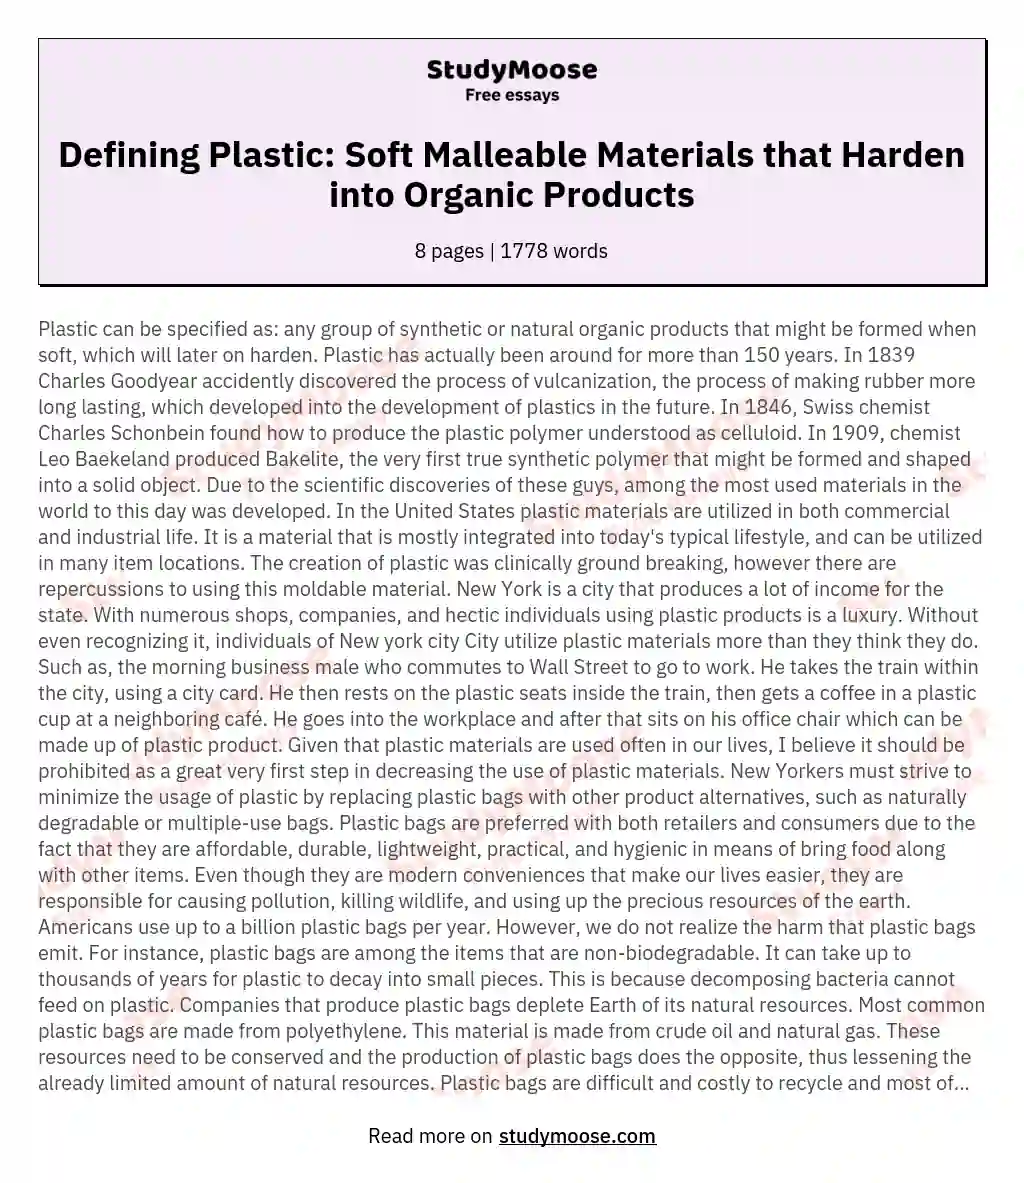 Defining Plastic: Soft Malleable Materials that Harden into Organic Products essay